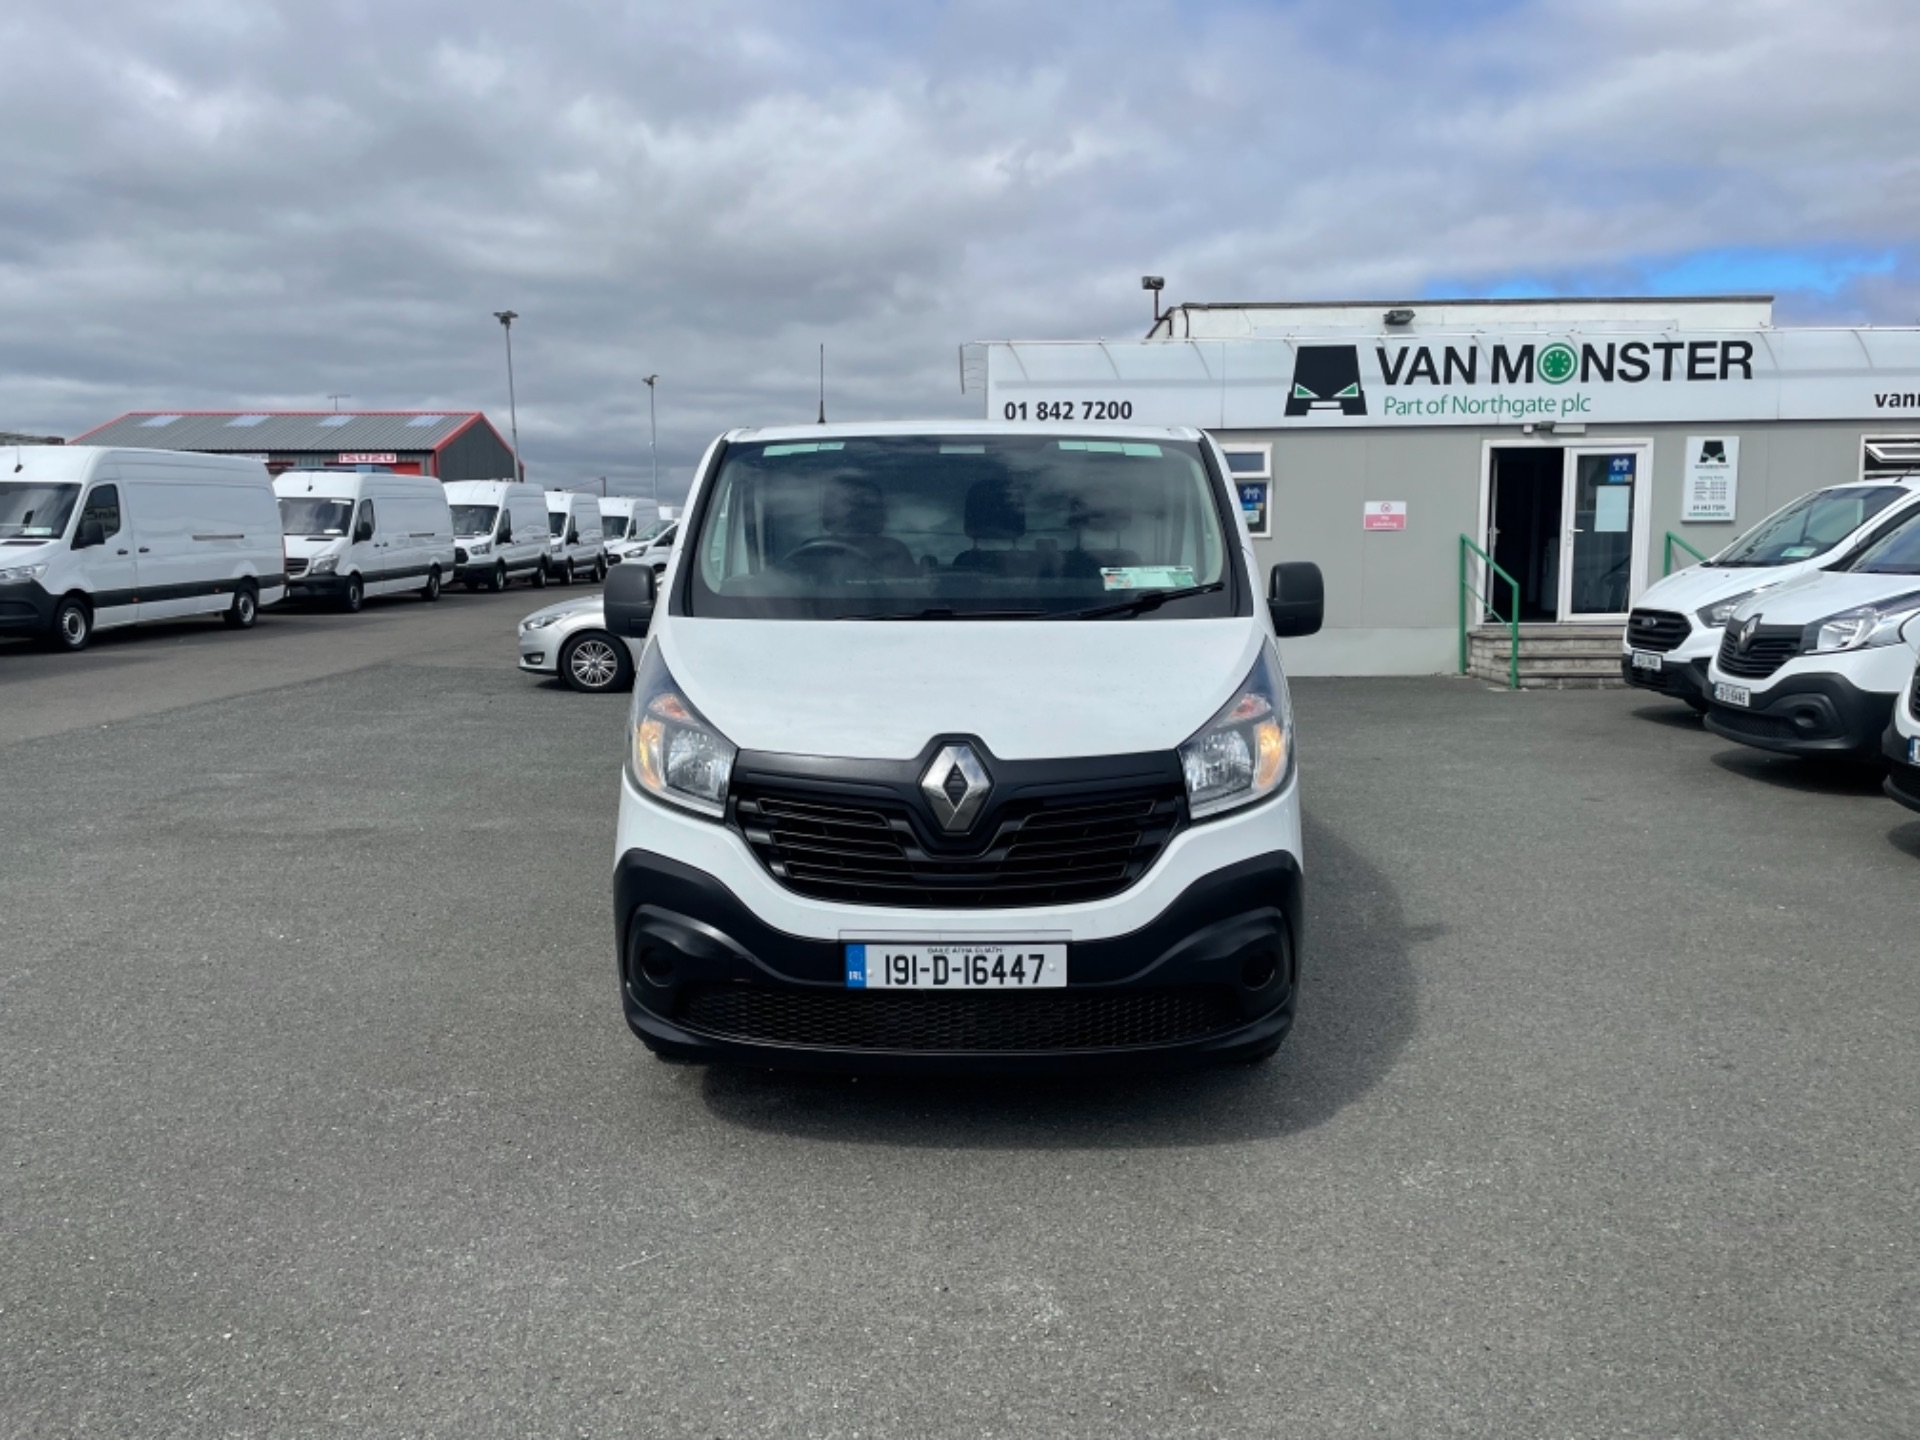 2019 Renault Trafic LL29 DCI 120 Business (191D16447) Image 2